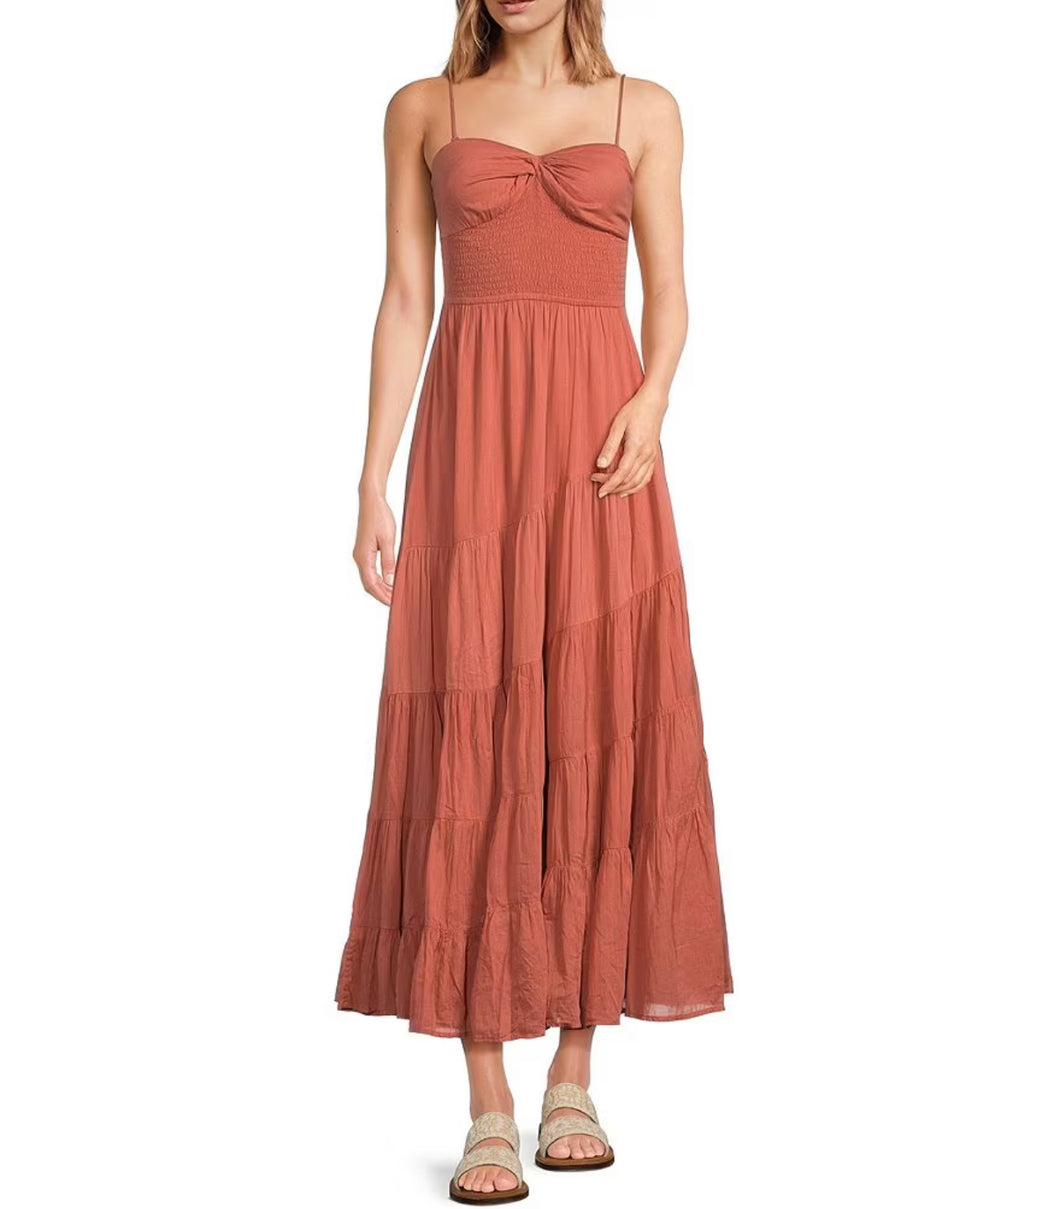 Free People Sundrenched Sweetheart Neck Sleeveless Maxi Dress - Clay